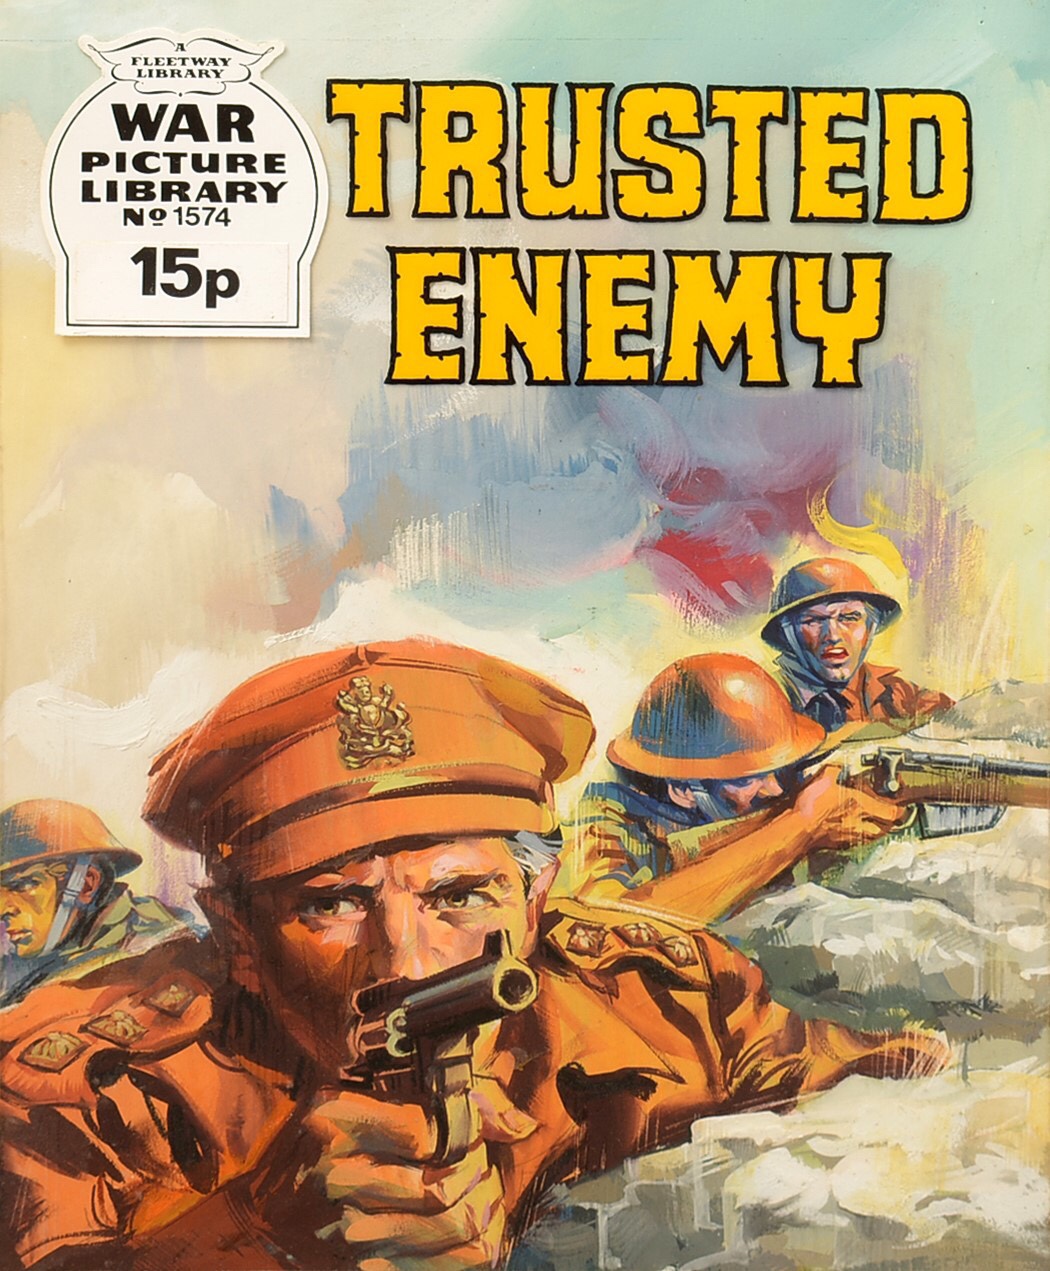 Original Art Work for the front cover of War Picture Library, No. 300 'Trusted Enemy', by Alessandro Biffignandi